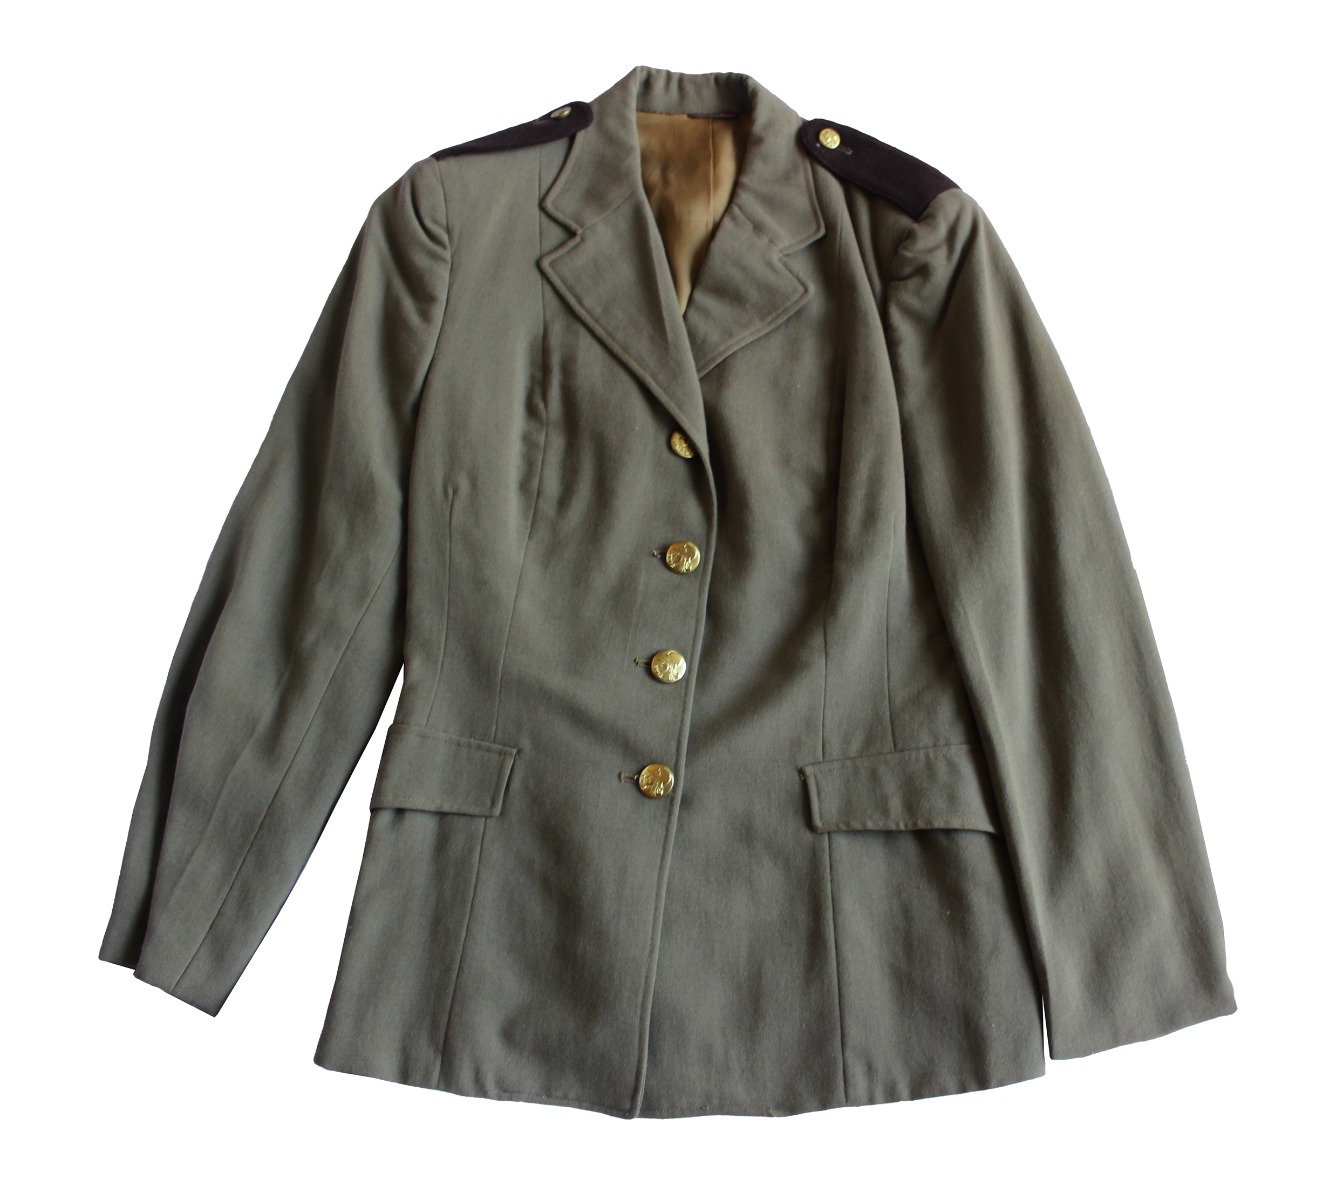 CWAC CANADIAN WOMEN'S ARMY CORPS JACKET 